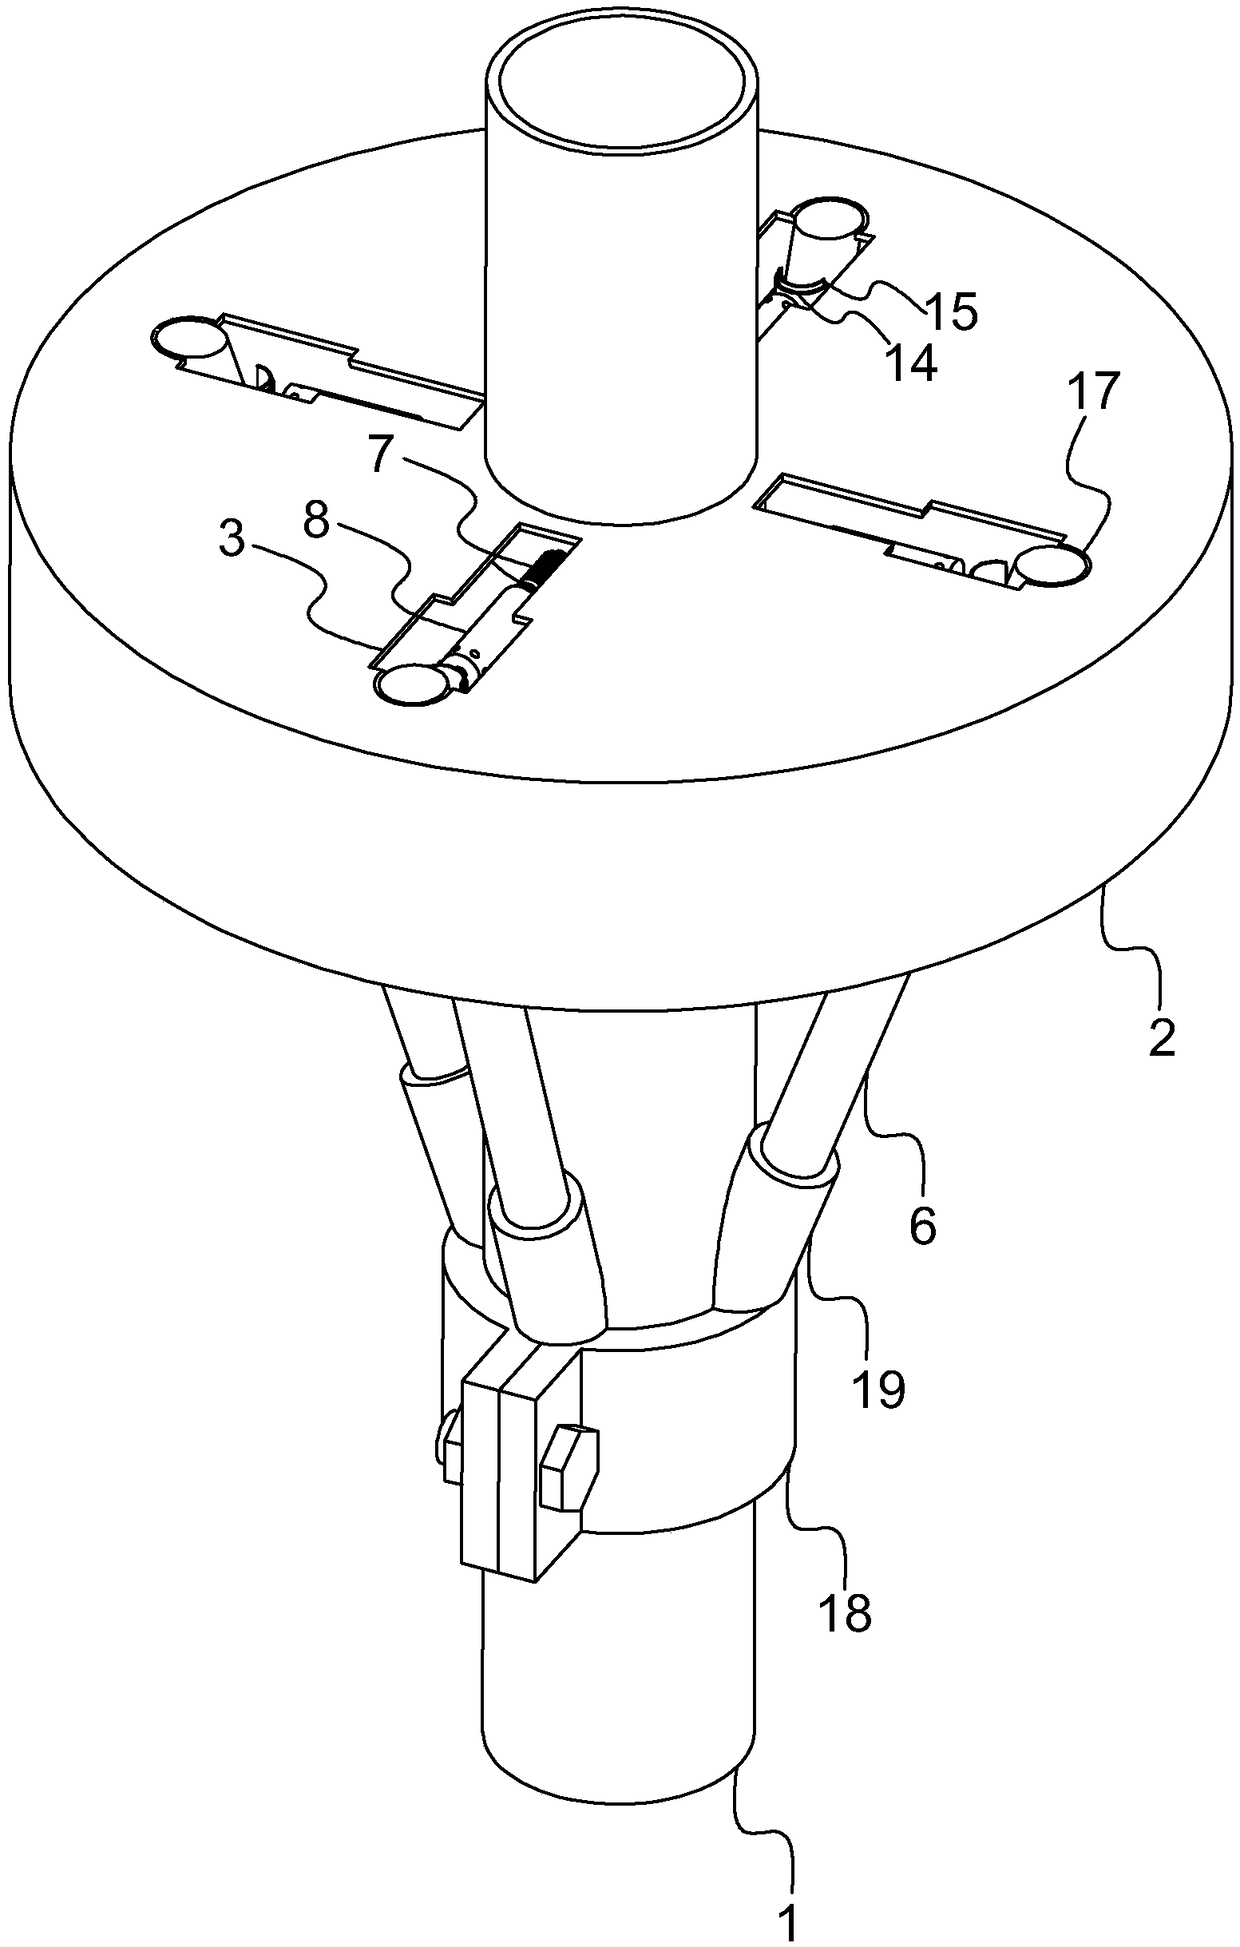 Disc-type scaffold capable of being mounted and dismounted